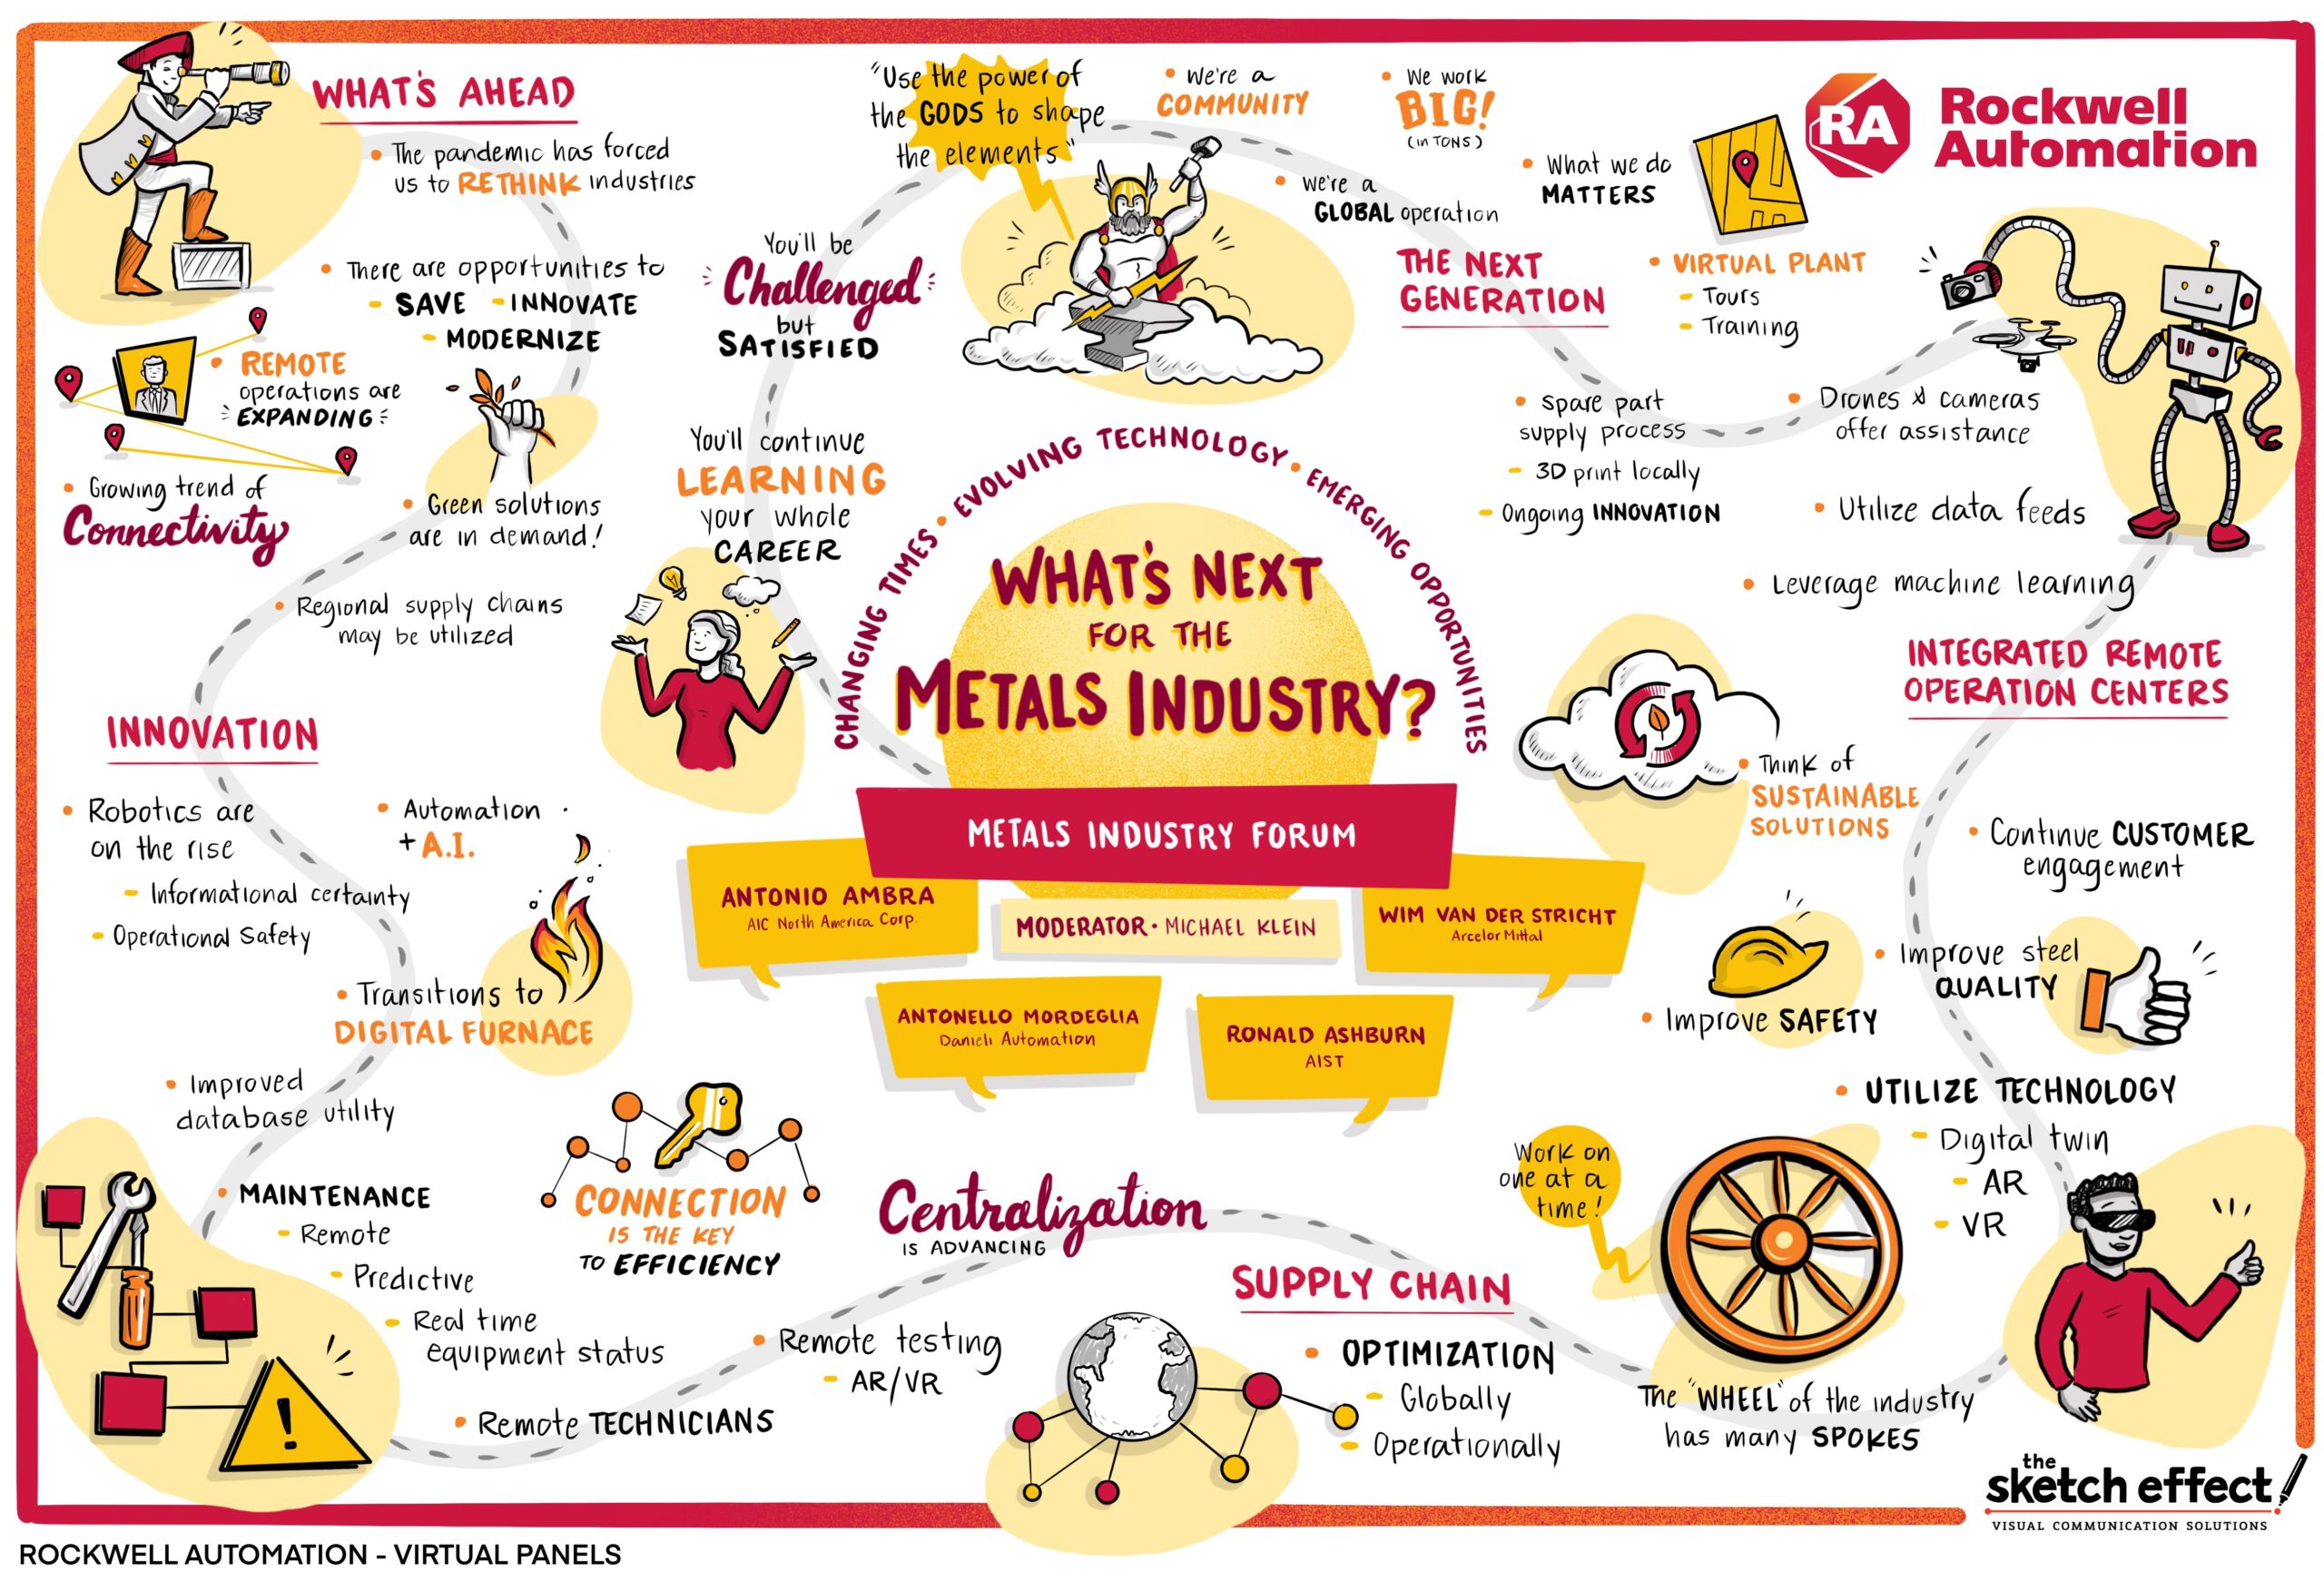 Graphic Recording Sketch created for Rockwell Automation - Virtual Panels - Titled: What's Next for the Metals Industry